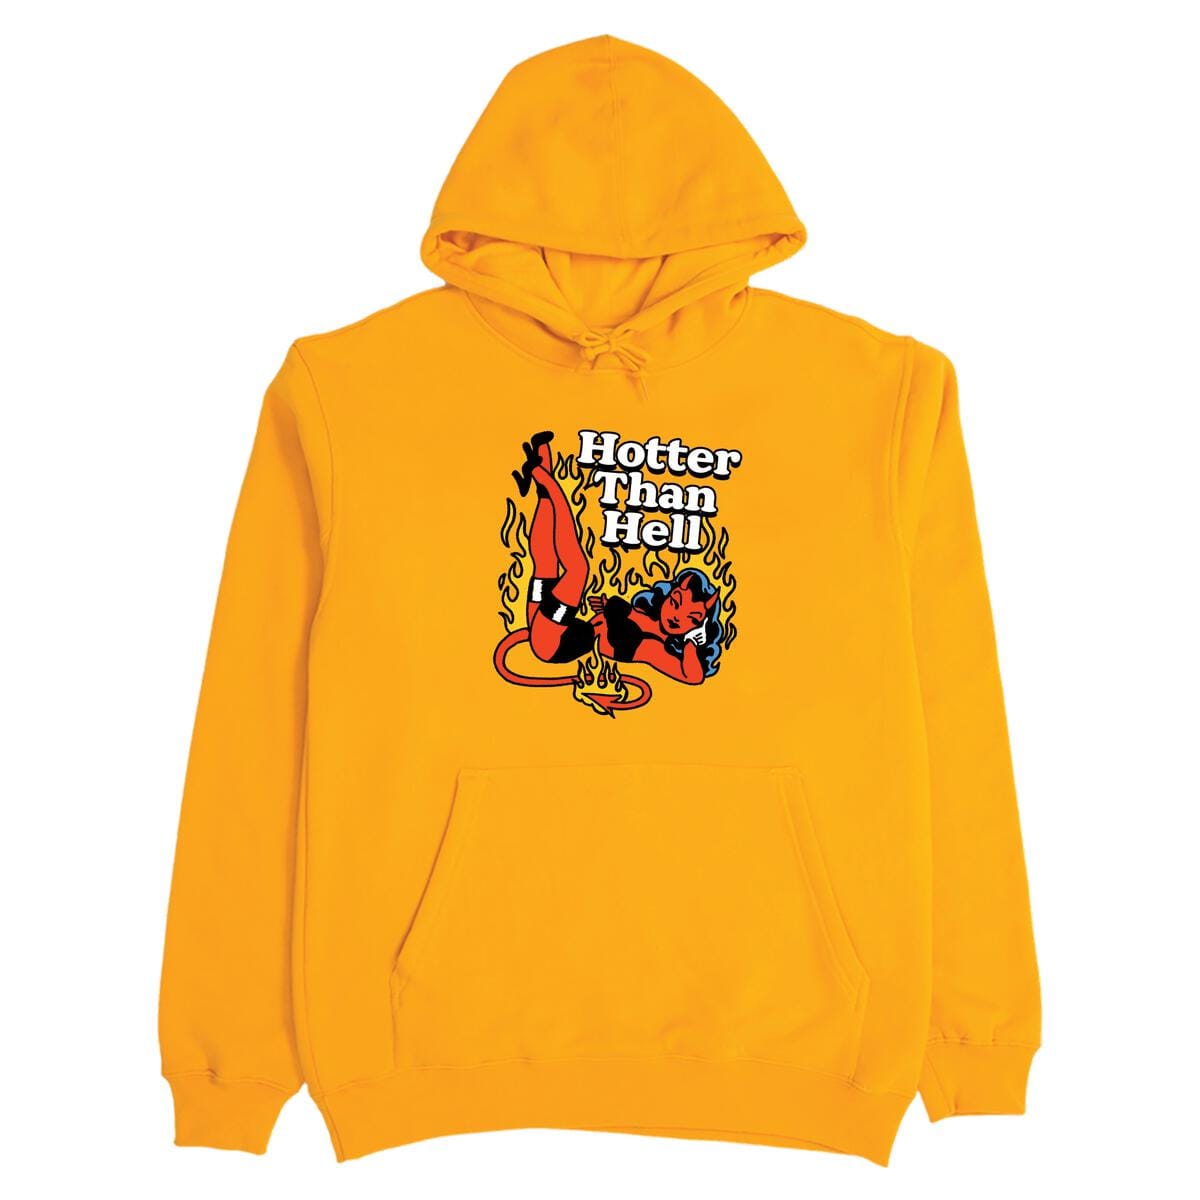 LONLY HEARTS T SHIRT Gold Hotter than Hell Hoodie